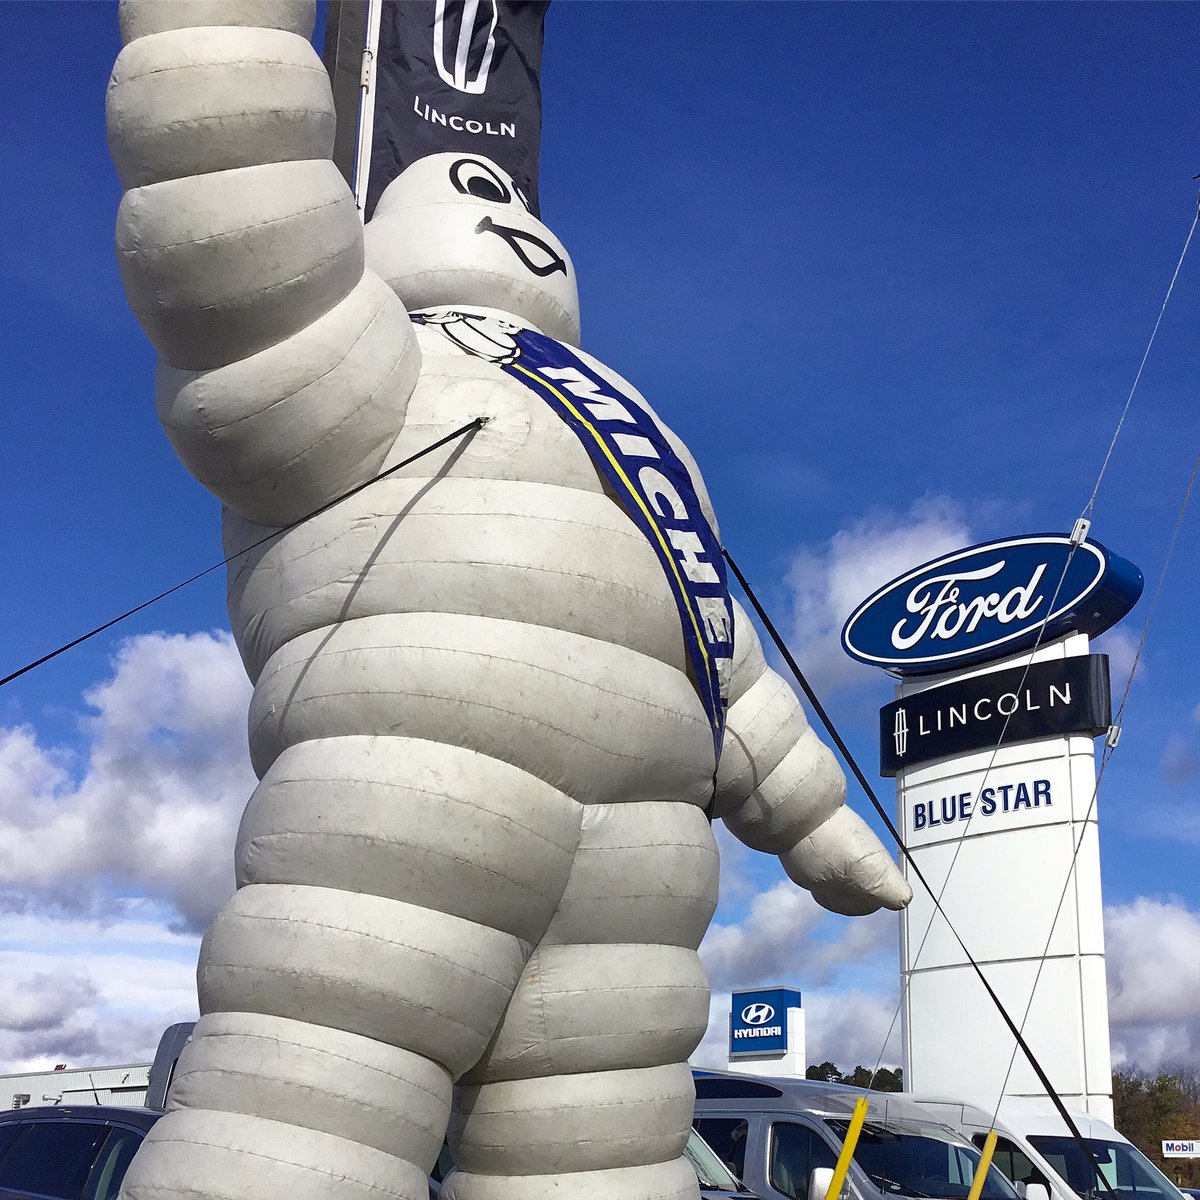 Come get your picture with the #MichelinMan and make sure to visit our service and parts departments. 
#WeMakeEverythingEasy #BlueStarFamily #servicecentre #servicecenter #partsdepartment #Forddealer #instacar #instatruck